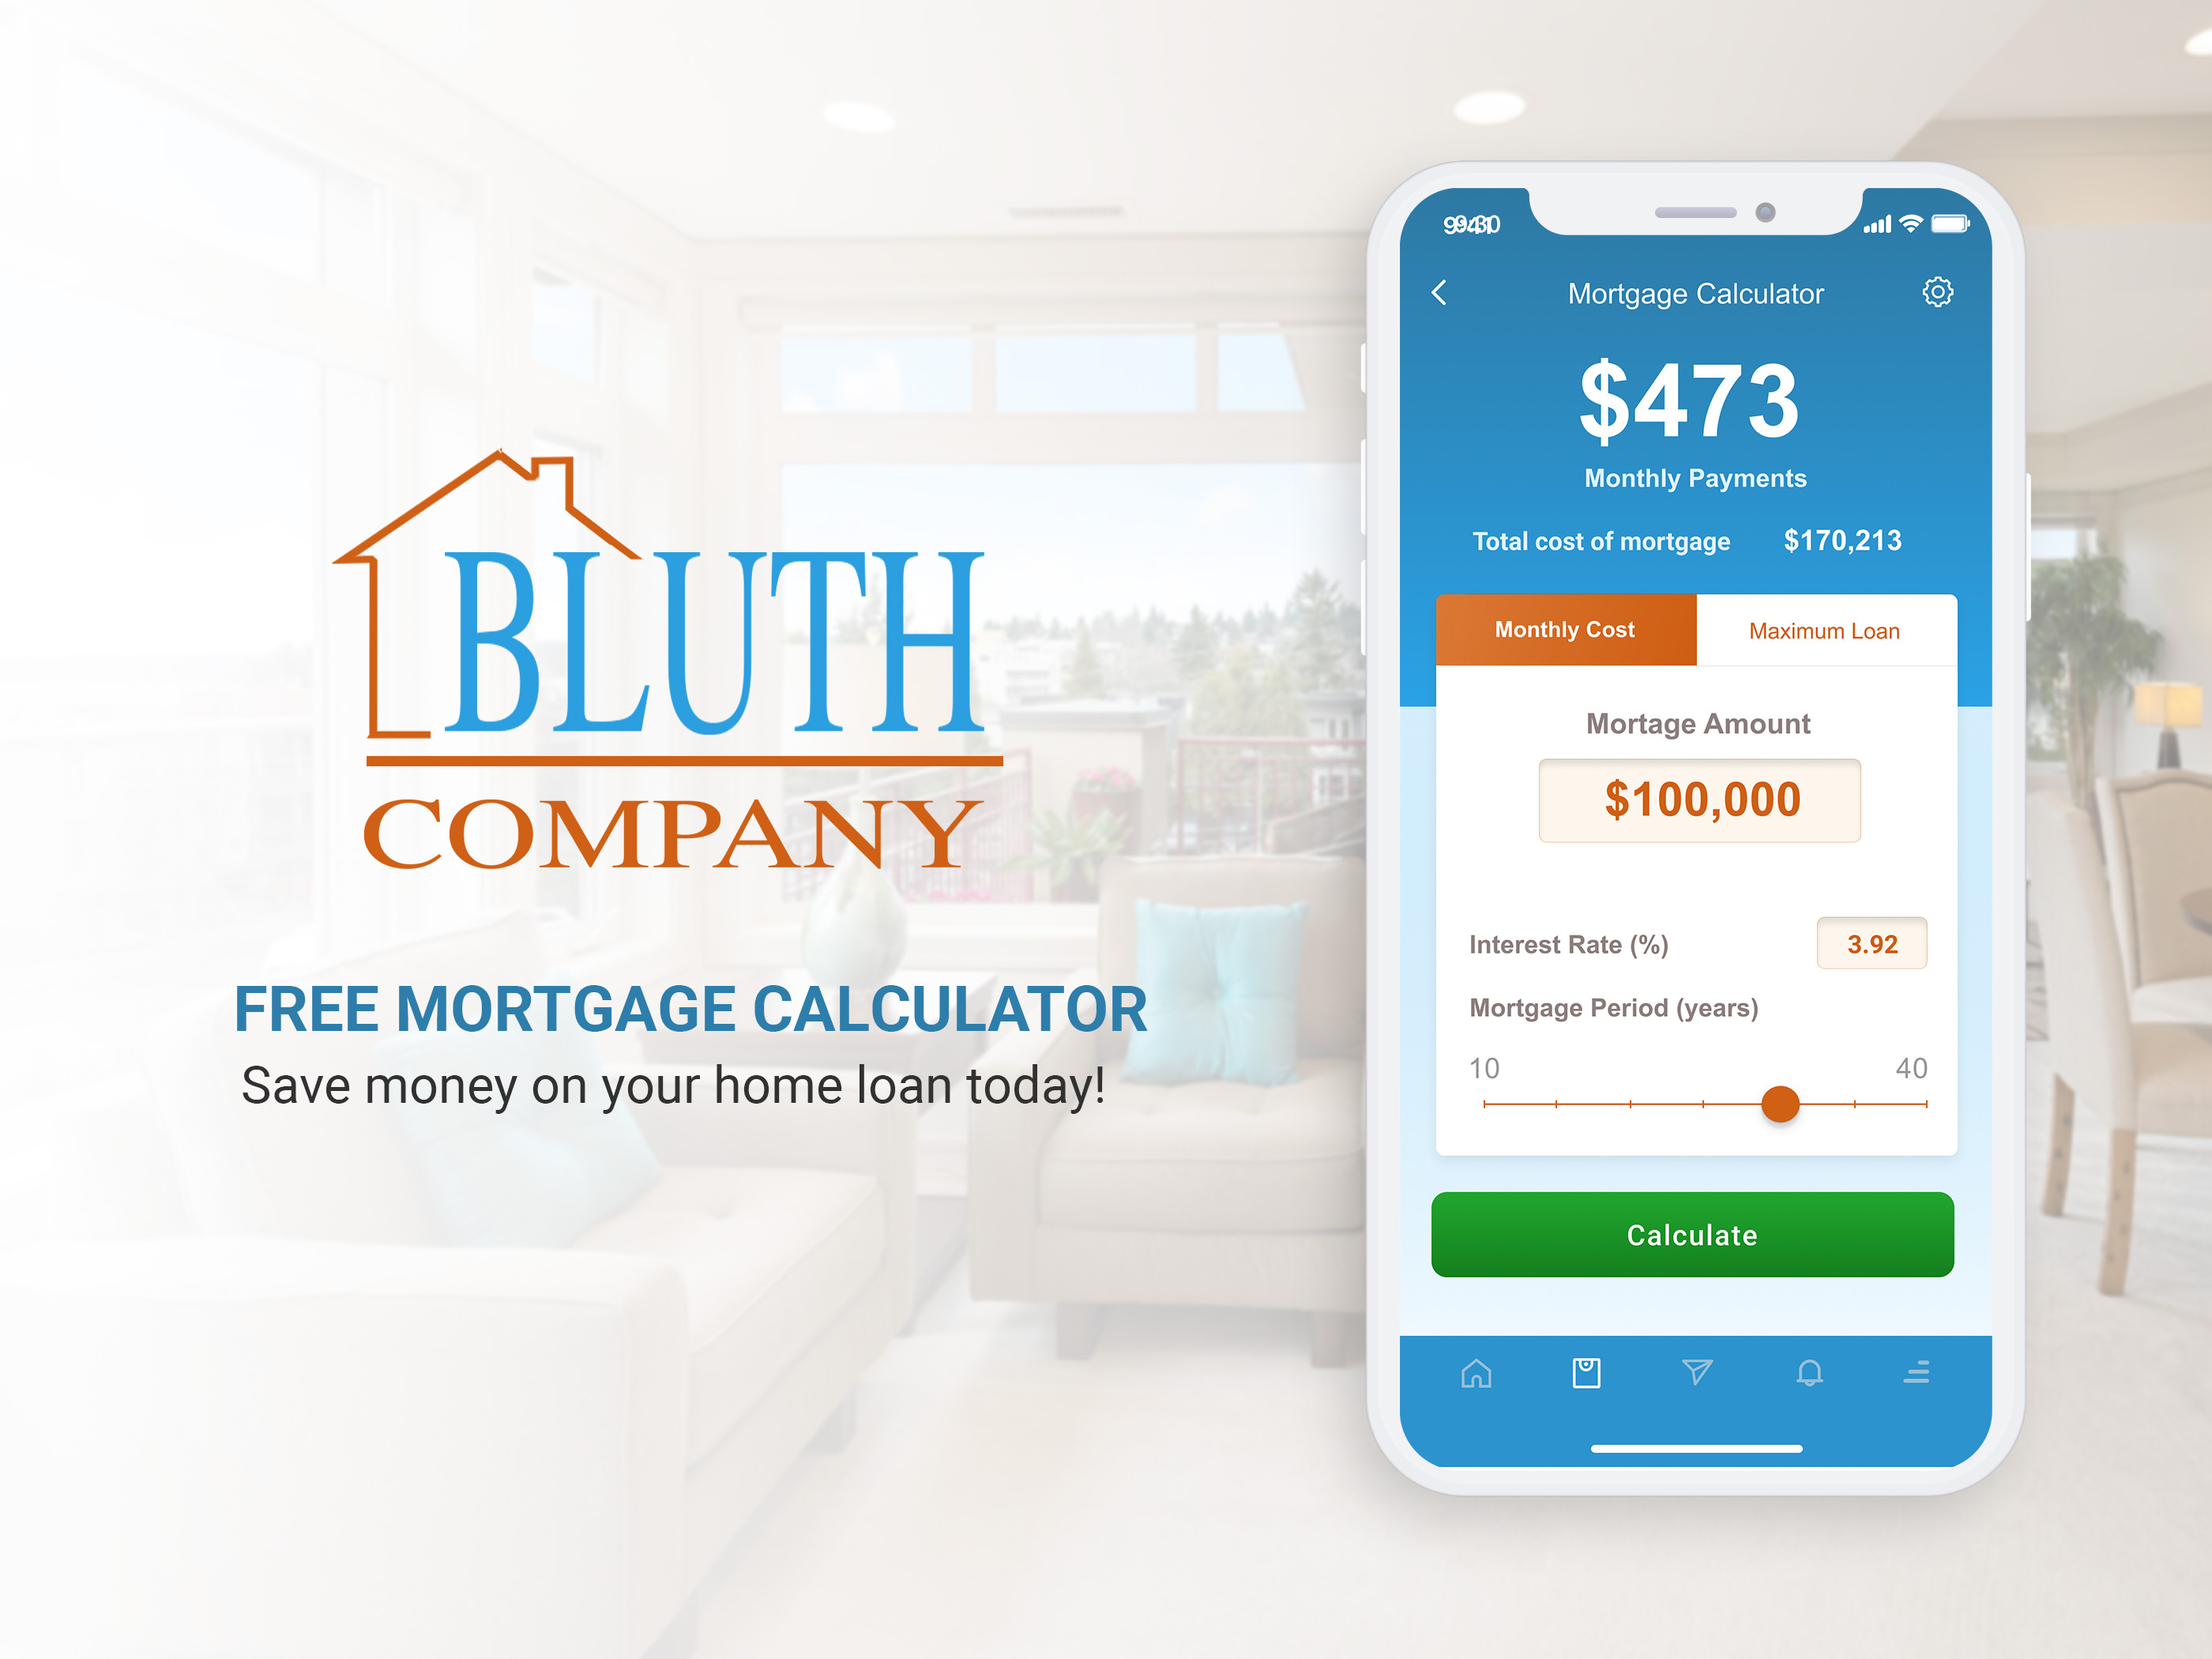 iphone mockup of Bluth company's mortgage calculator from Arrested Development for design challenge 004